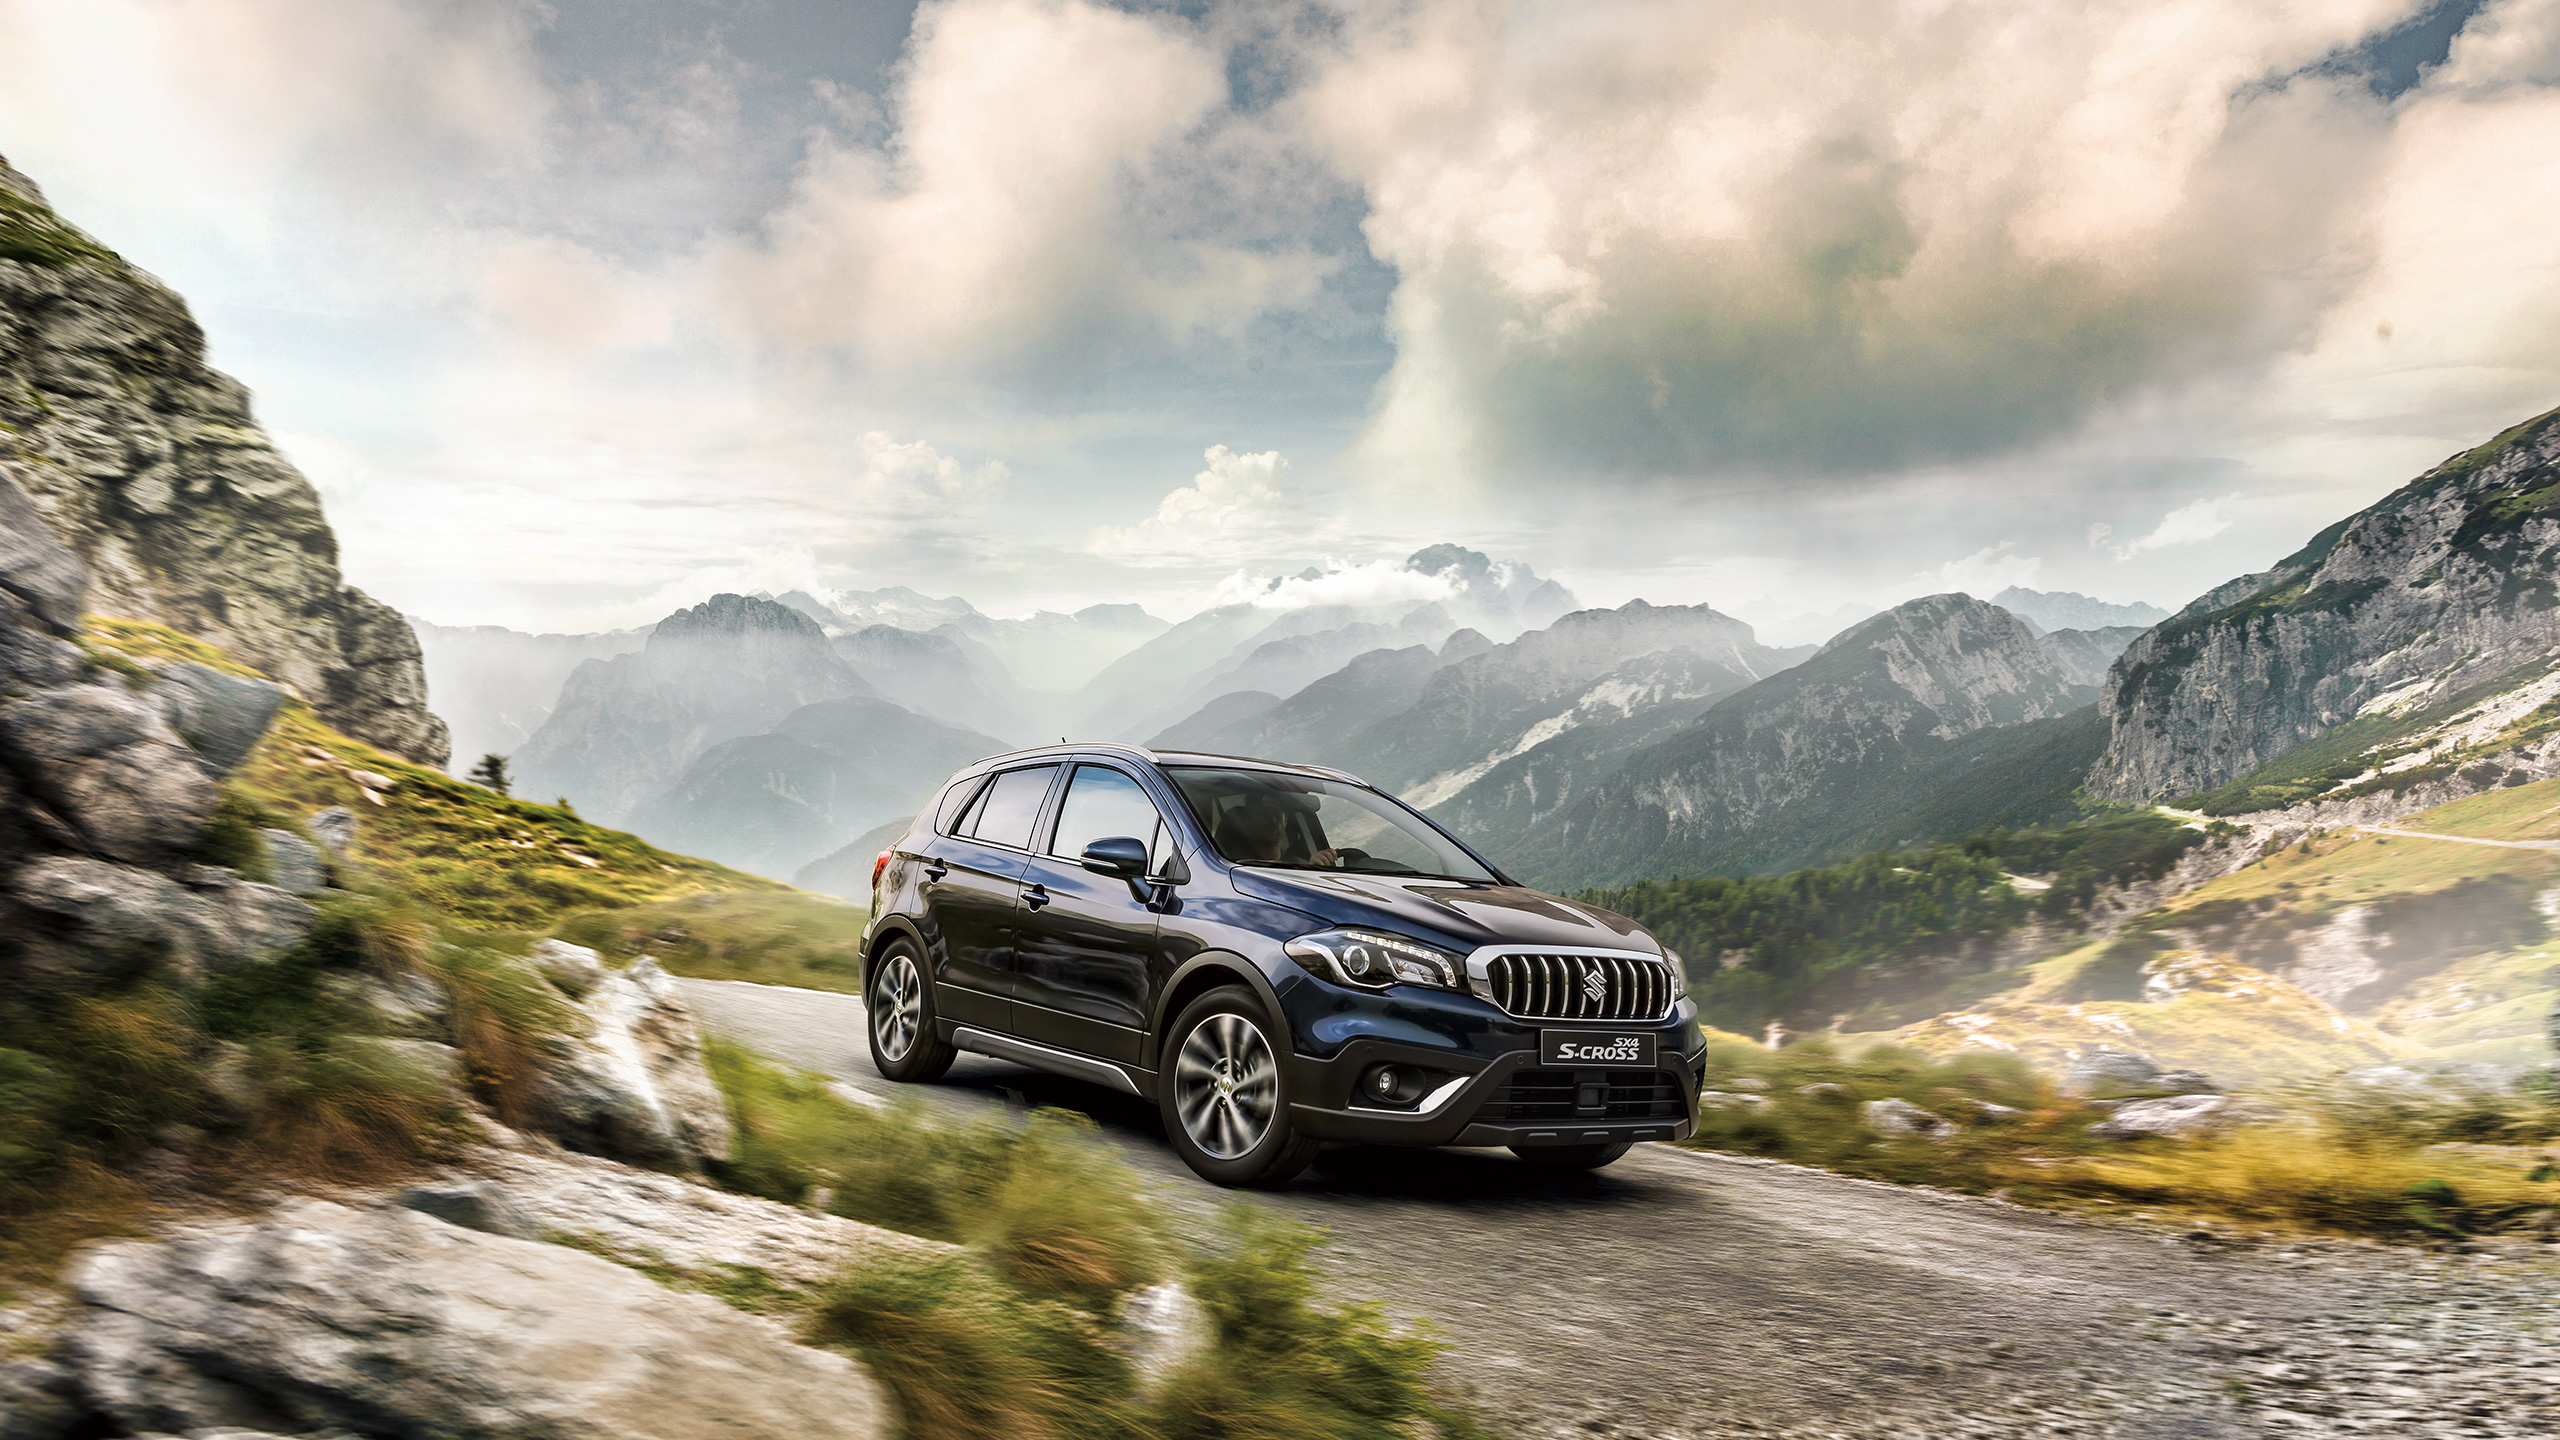 SX4-S-CROSS-driving-on-rough-road-in-mountains